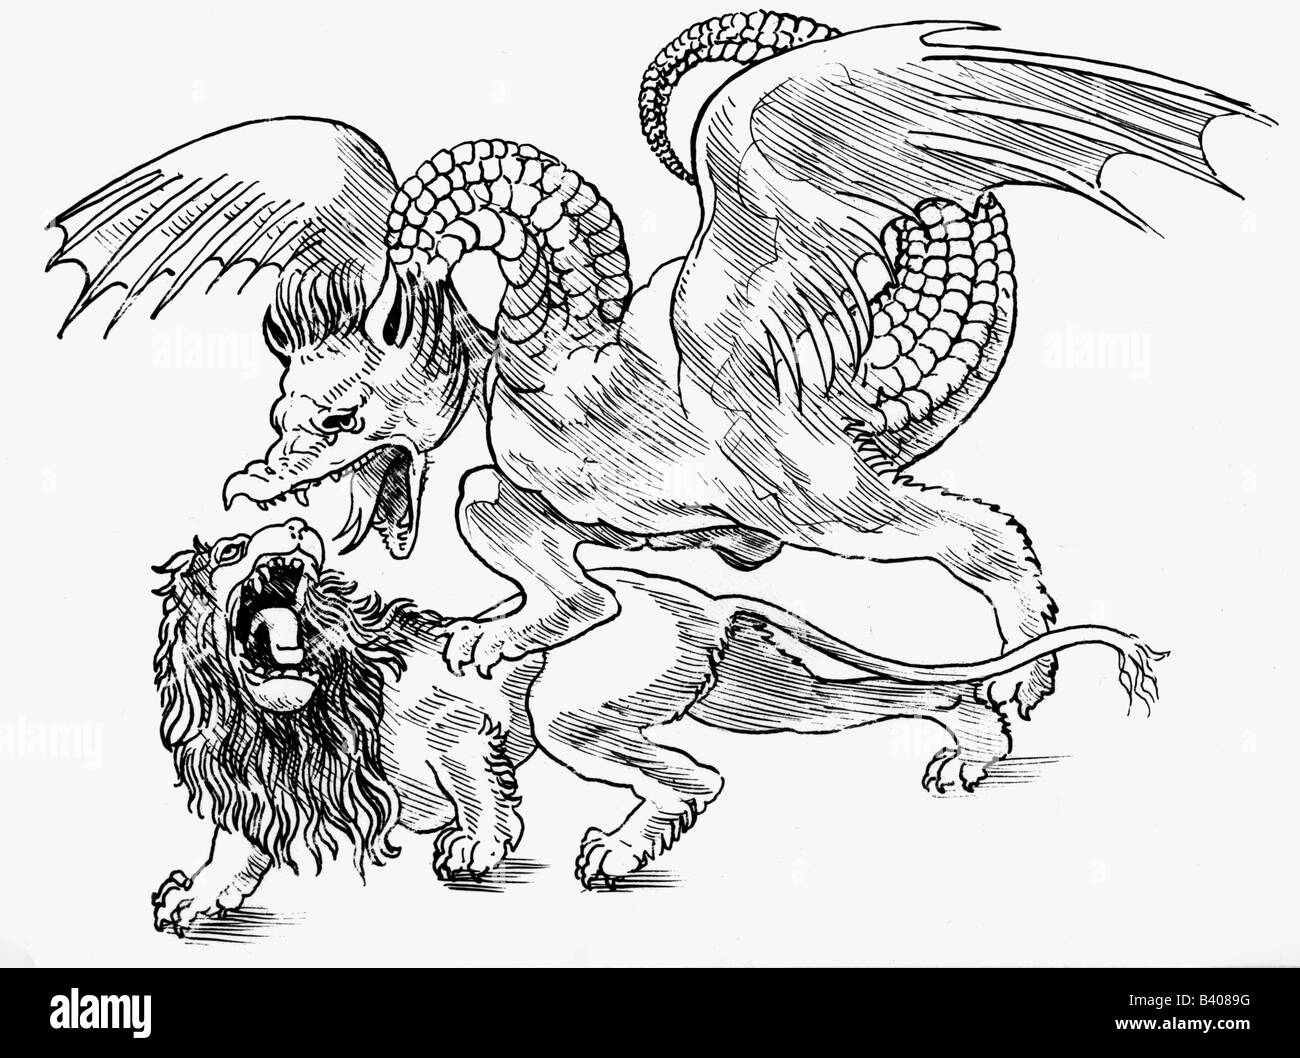 superstition, mythical creatures, dragons, a dragon fighting with a lion, drawing after Zoan Andrea, circa 1500, Stock Photo